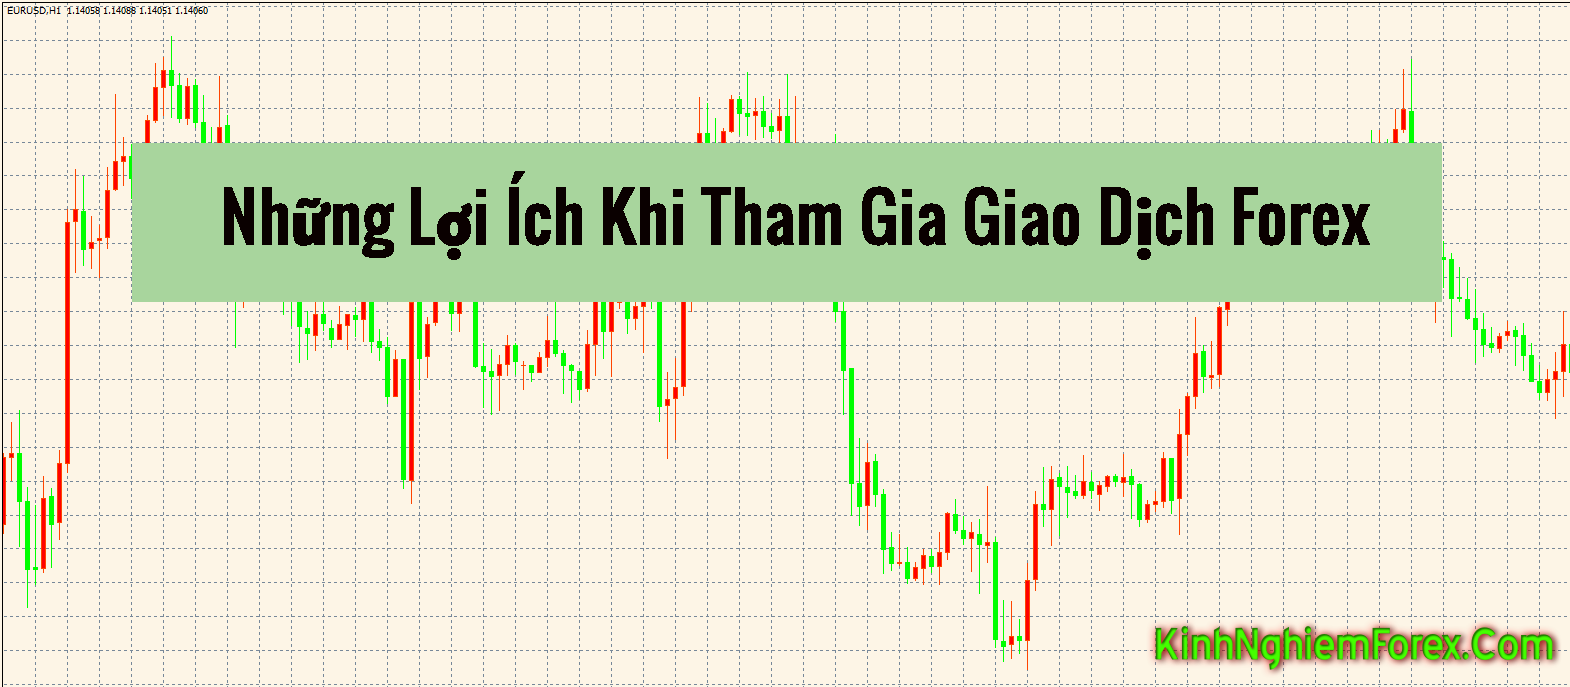 giao dịch forex